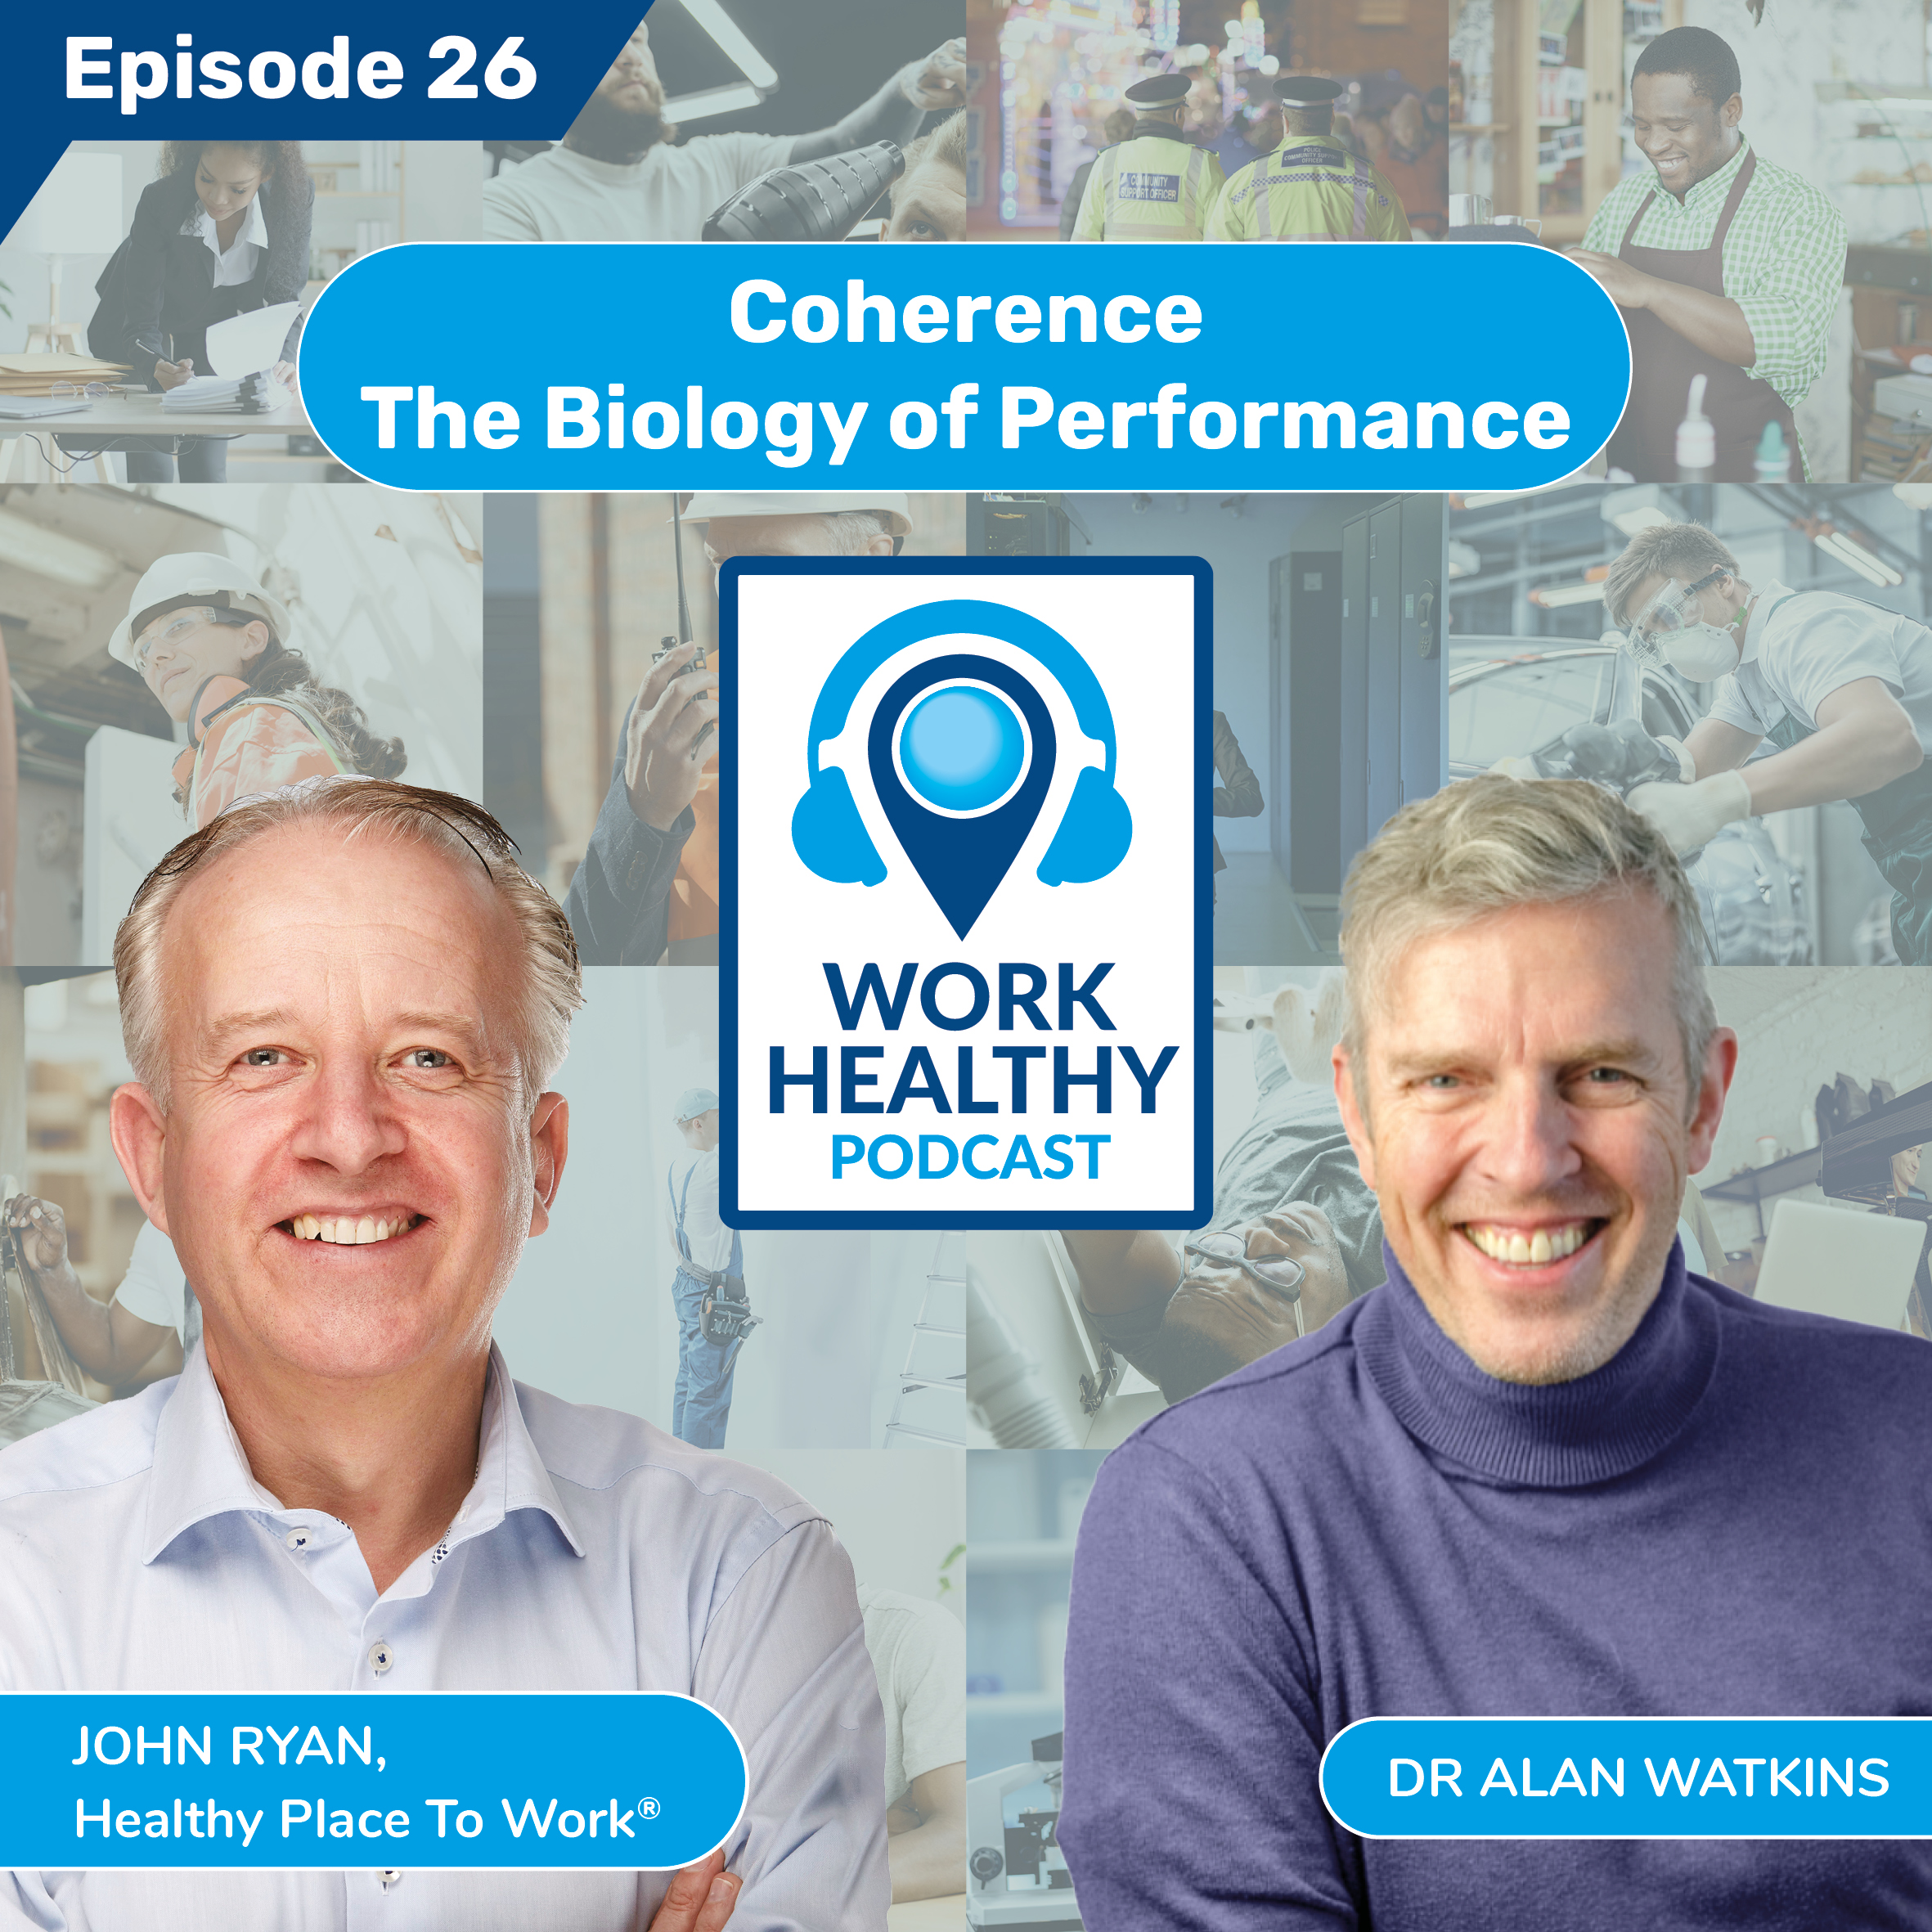 Coherence - The Biology of Performance - Dr Alan Watkins